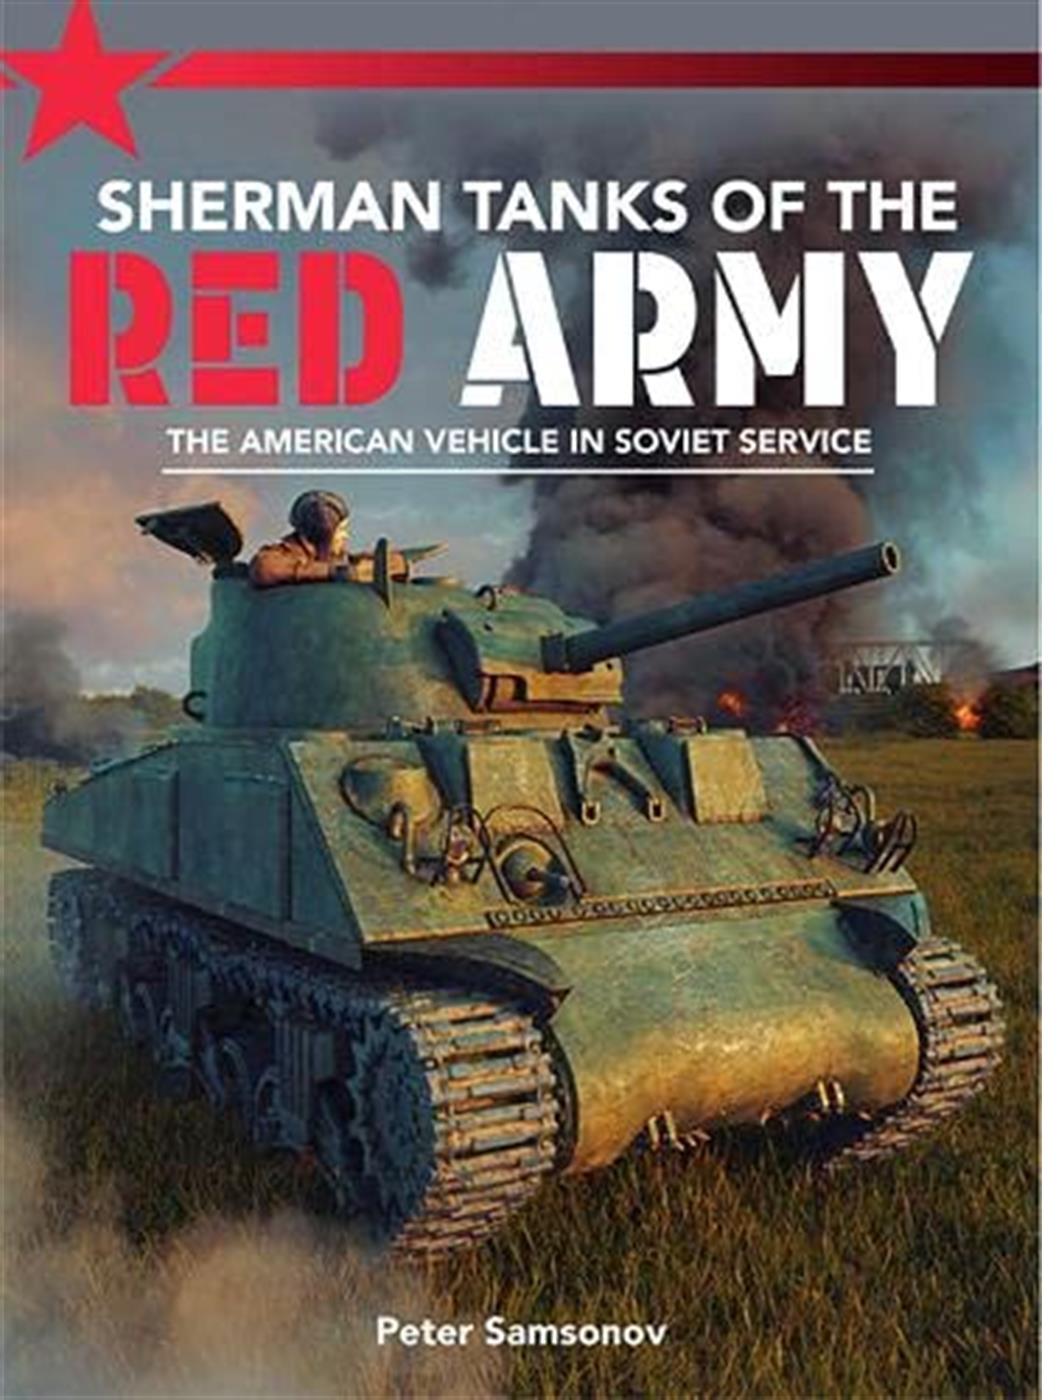 9781911658474 Sherman Tanks of The Red Army The American Vehicle in service book by Peter Samsonov